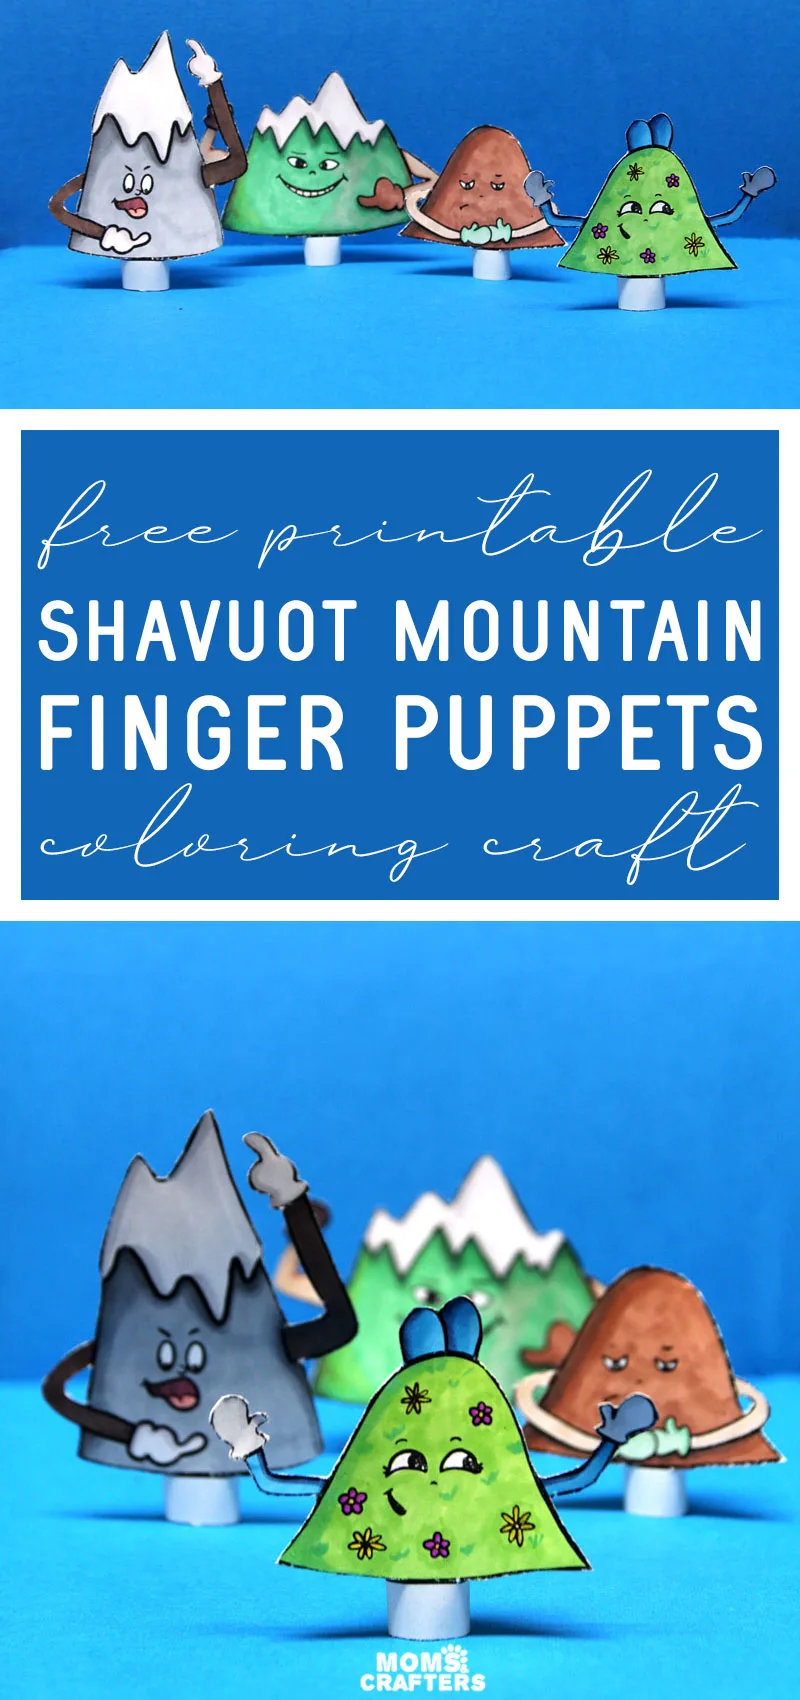 Click to download free printable shavuot puppets including Har sinai and the lesson on being humble! This fun Jewish shavuos craft for kids is great for preschool and toddlers and a fun at home activity or Hebrew school craft.